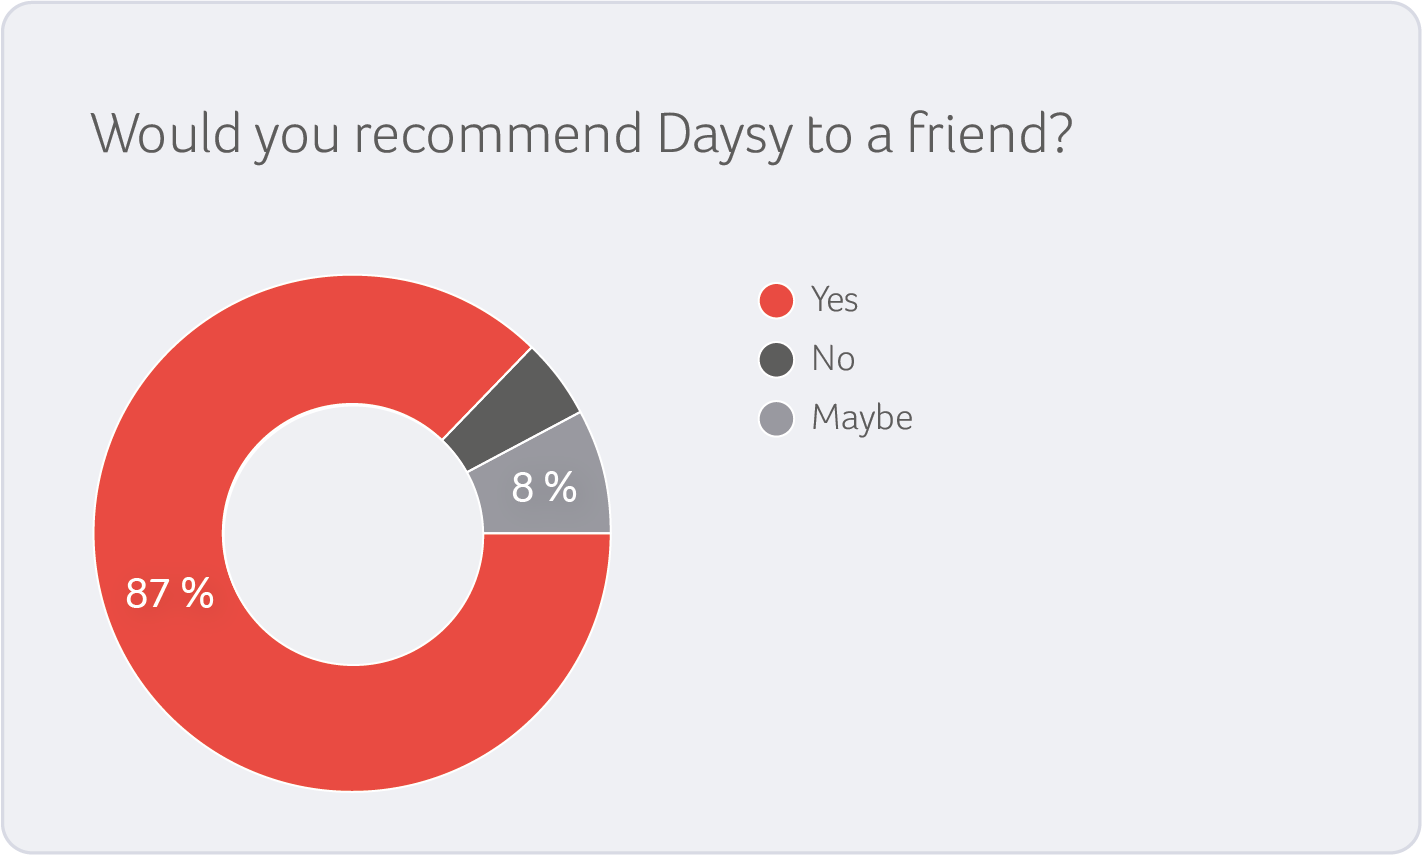 87% would recommend Daysy